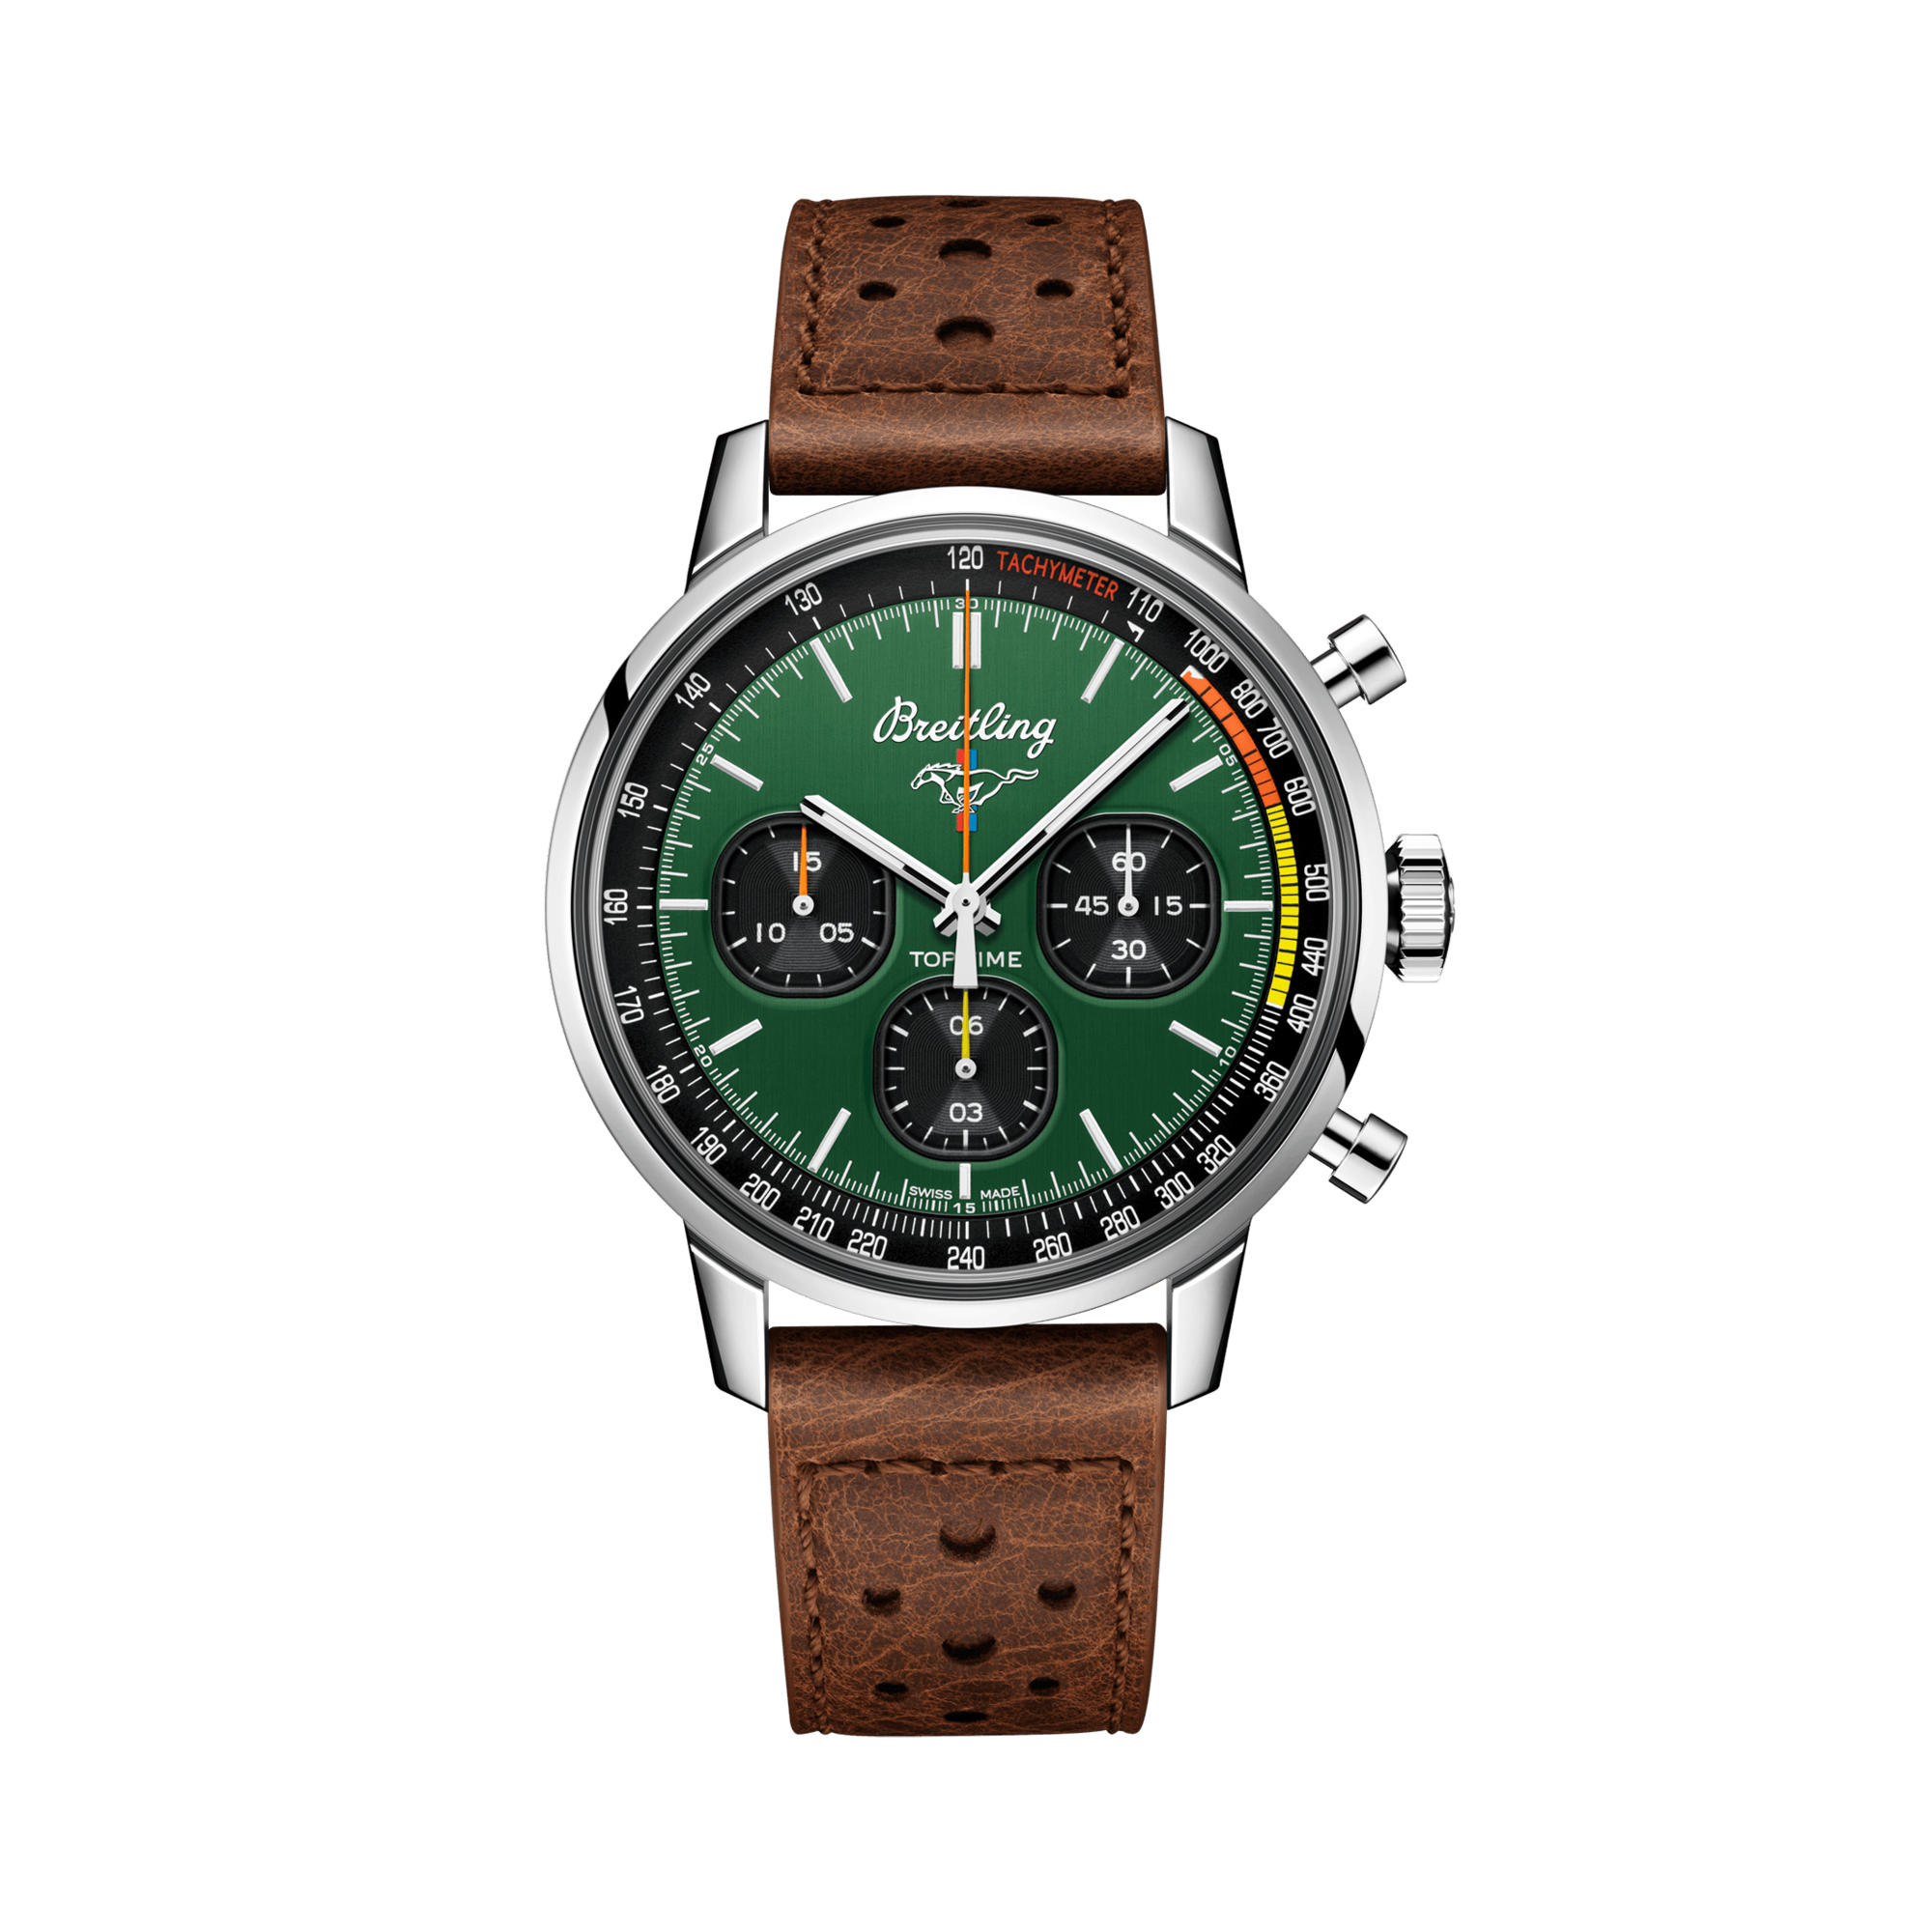 Breitling Top Time Ford Mustang 42mm, Green Dial, Baton Numeral_1